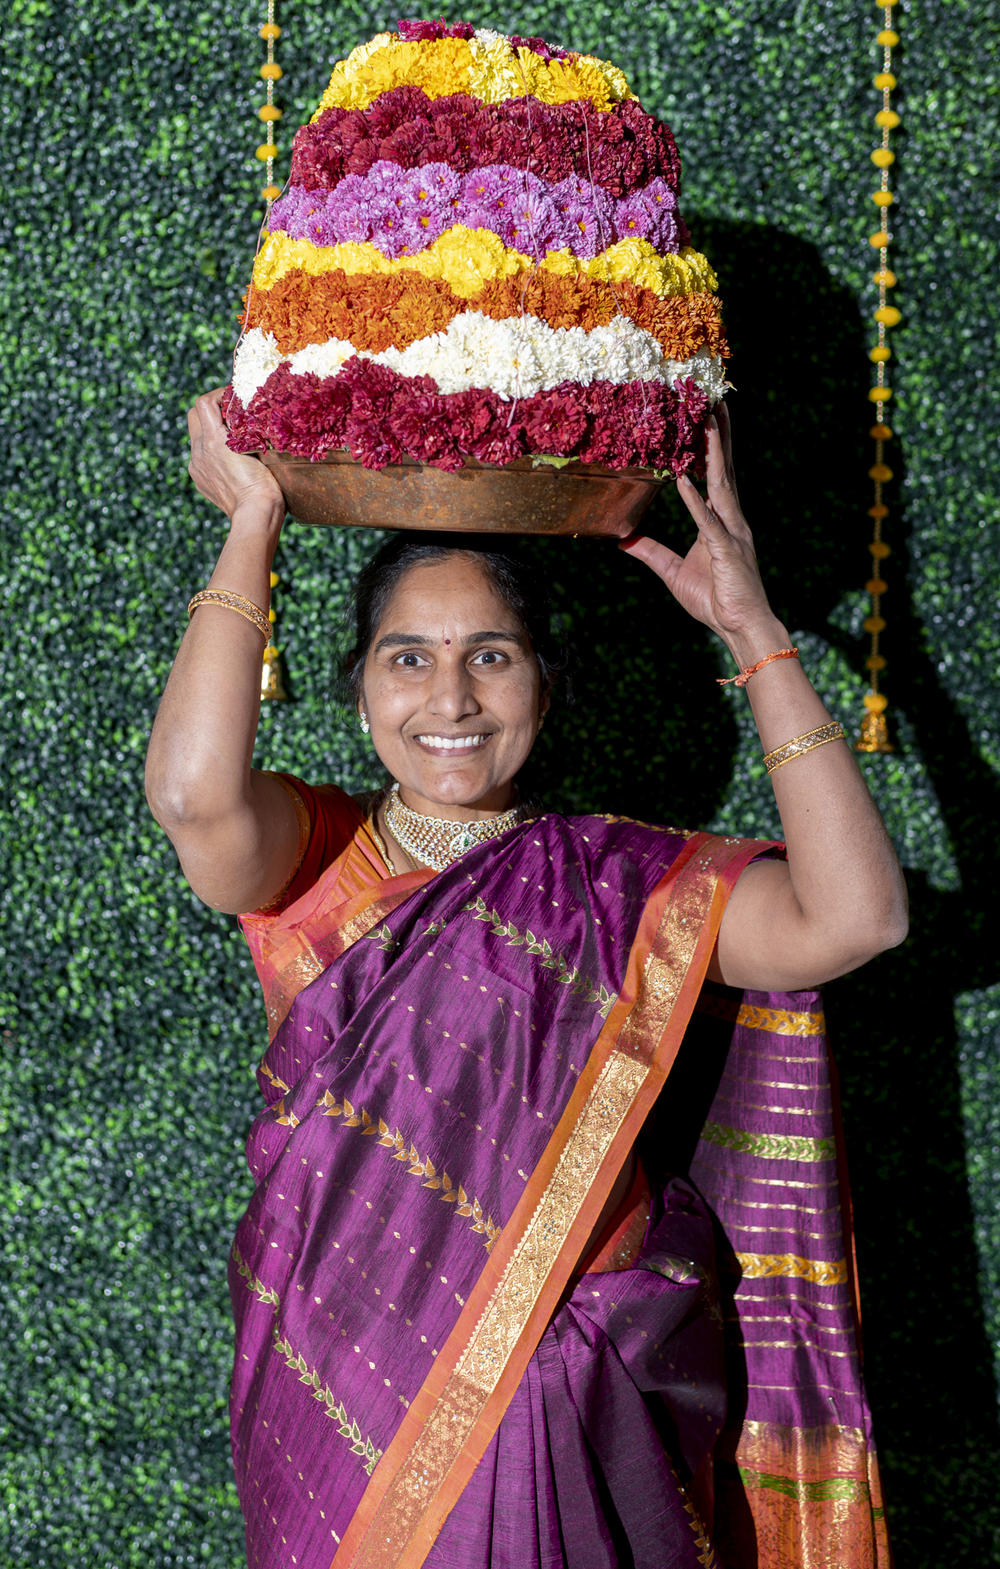 Anitha Kethireddy, 46, poses for a portrait in a saree as she carries the Bathukamma — a pyramid-shaped stack of flowers — on her head during a Bathukamma festival celebration organized by the Greater Lansing Telangana Community at the Okemos High School in Okemos, Mich., on Oct. 8, 2022.